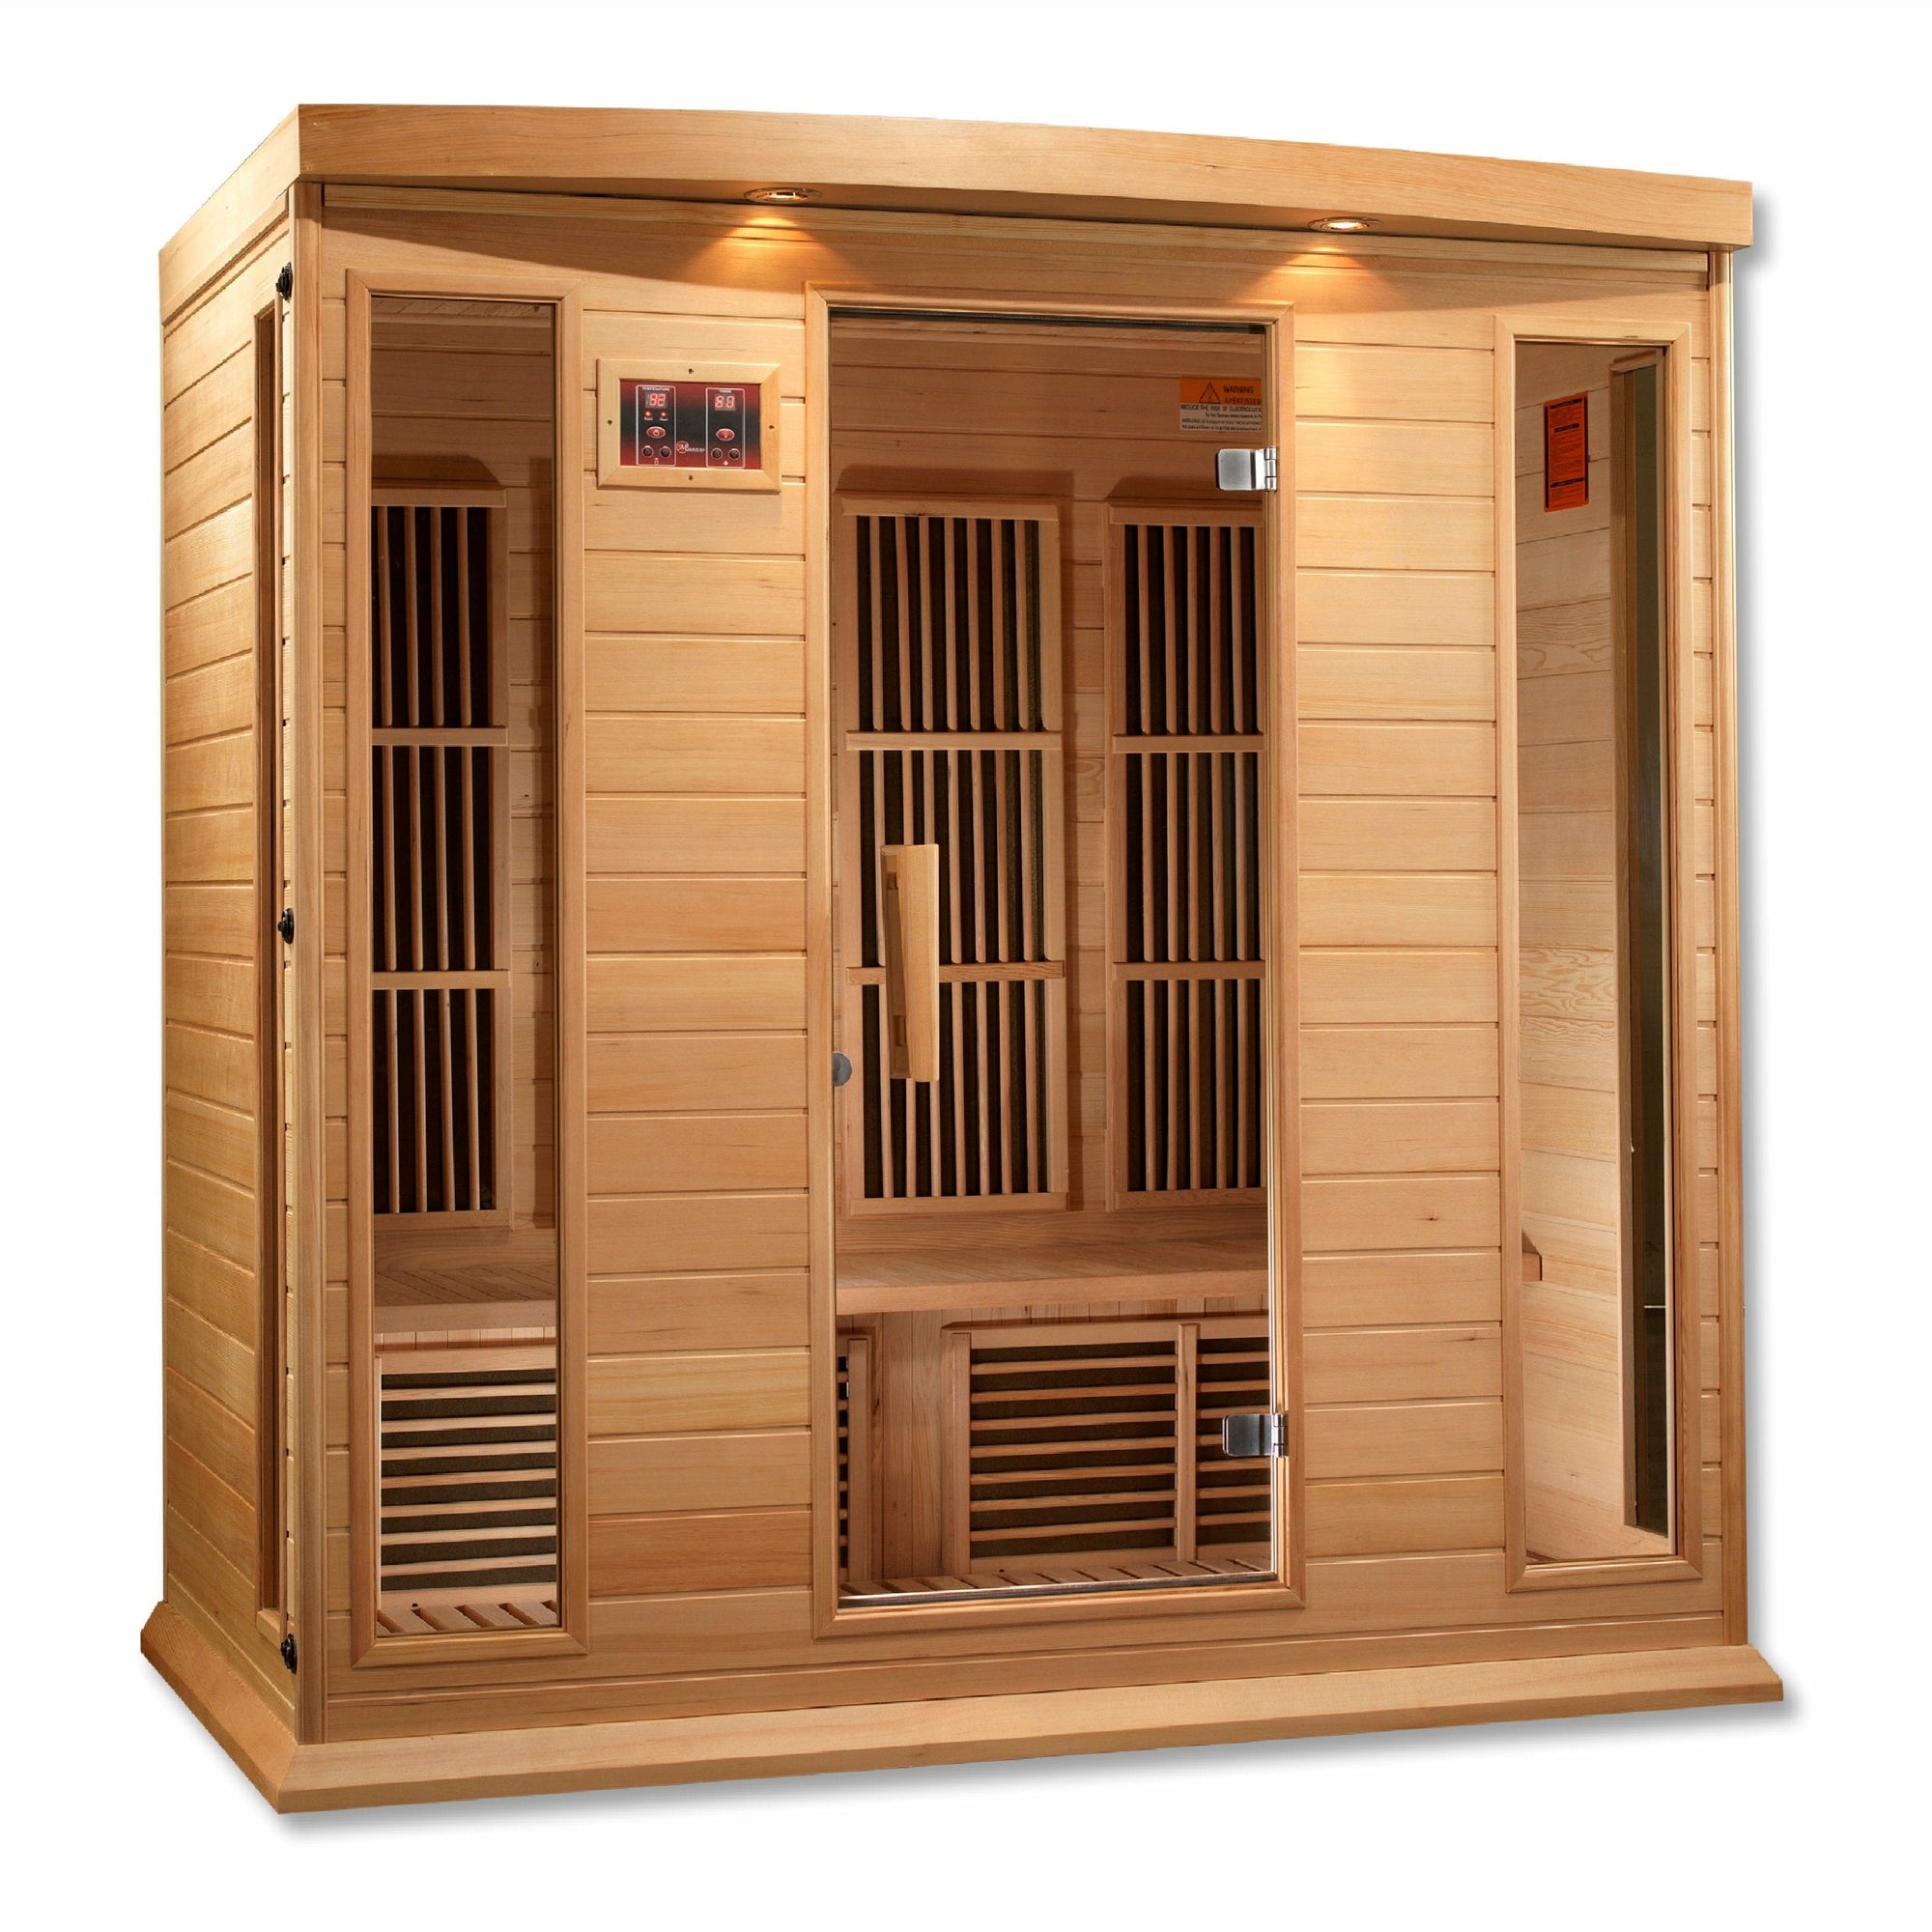 Maxxus Low EMF FAR Infrared Sauna - 4 Person - Natural hemlock wood construction with Tempered glass door and 2 full-length side windows,  Interior color therapy lighting,  Carbon heating panels, Roof vent,  Interior/exterior LED control panels,  FM Radio with BT, MP3 auxiliary, SD, and USB connection Electrical service in a white background